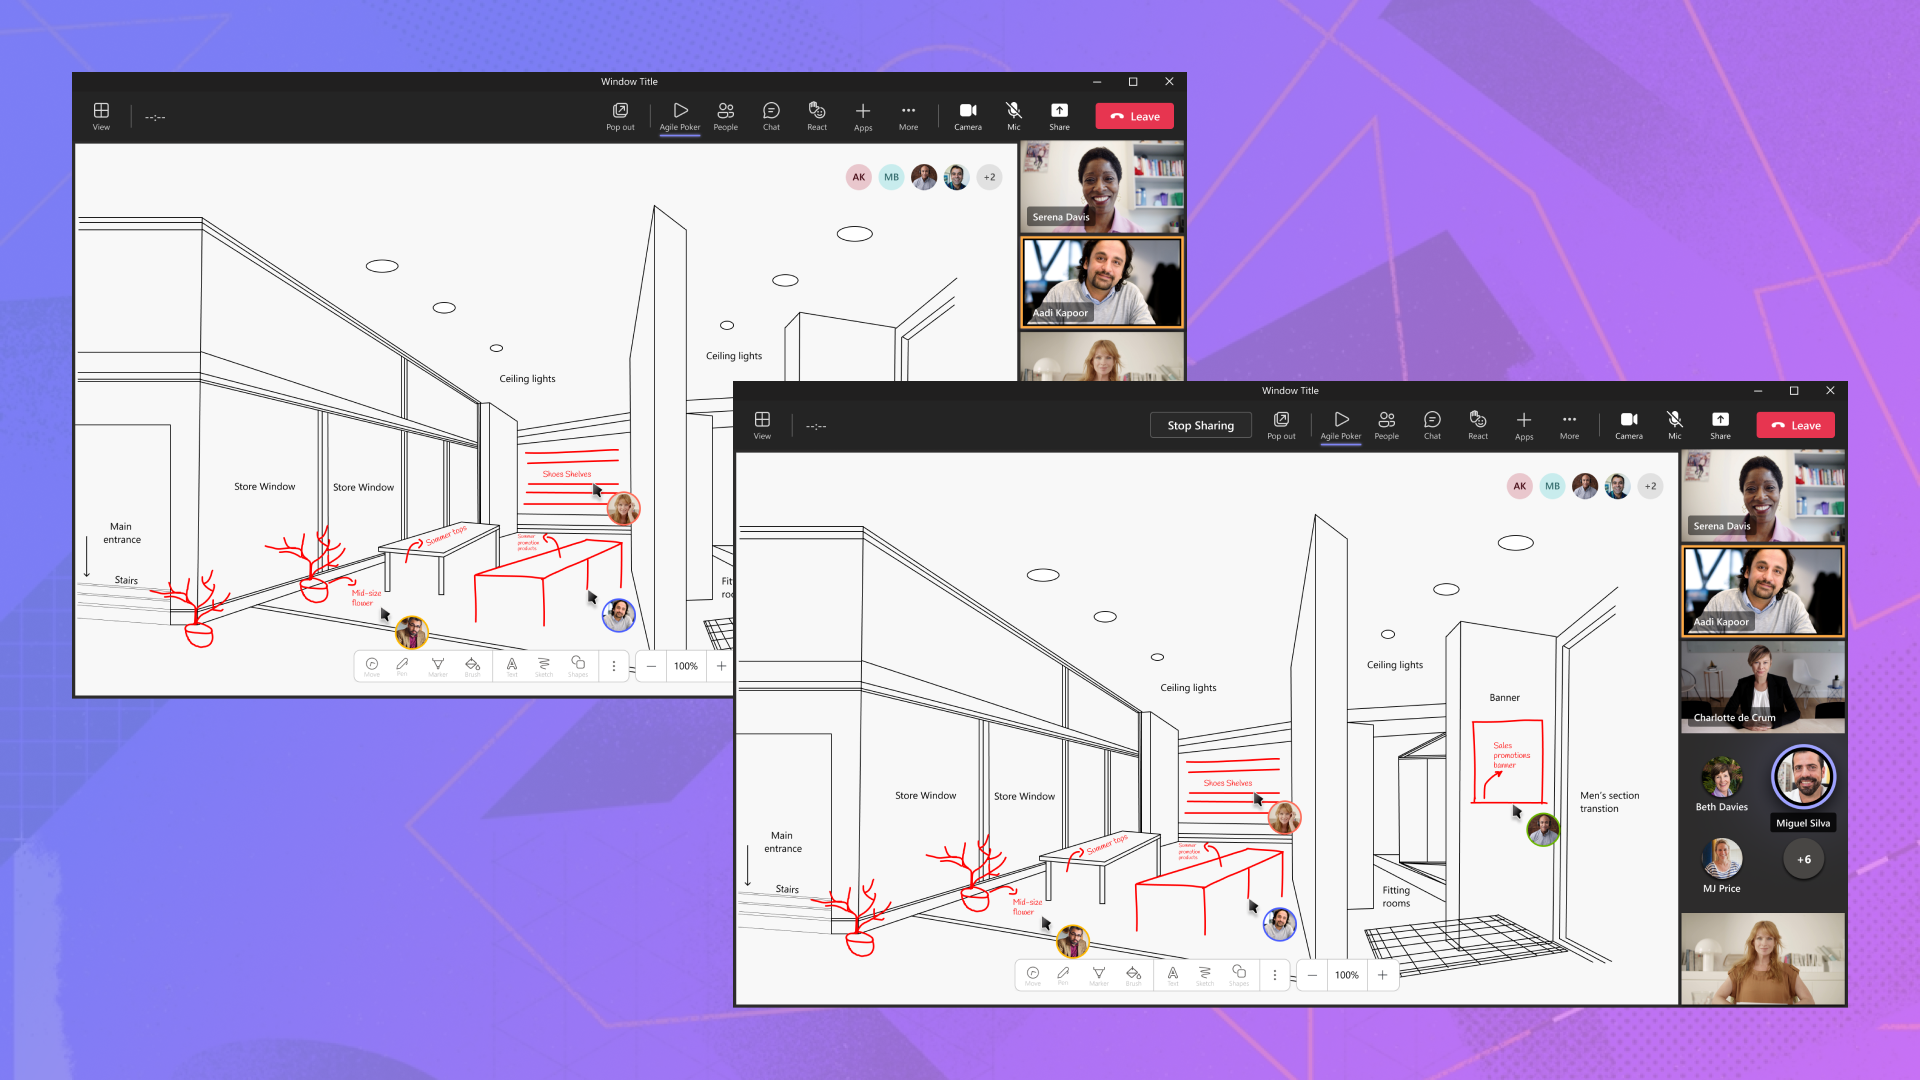 Screenshots shows an example of multiple users drawing on a canvas during a meeting.